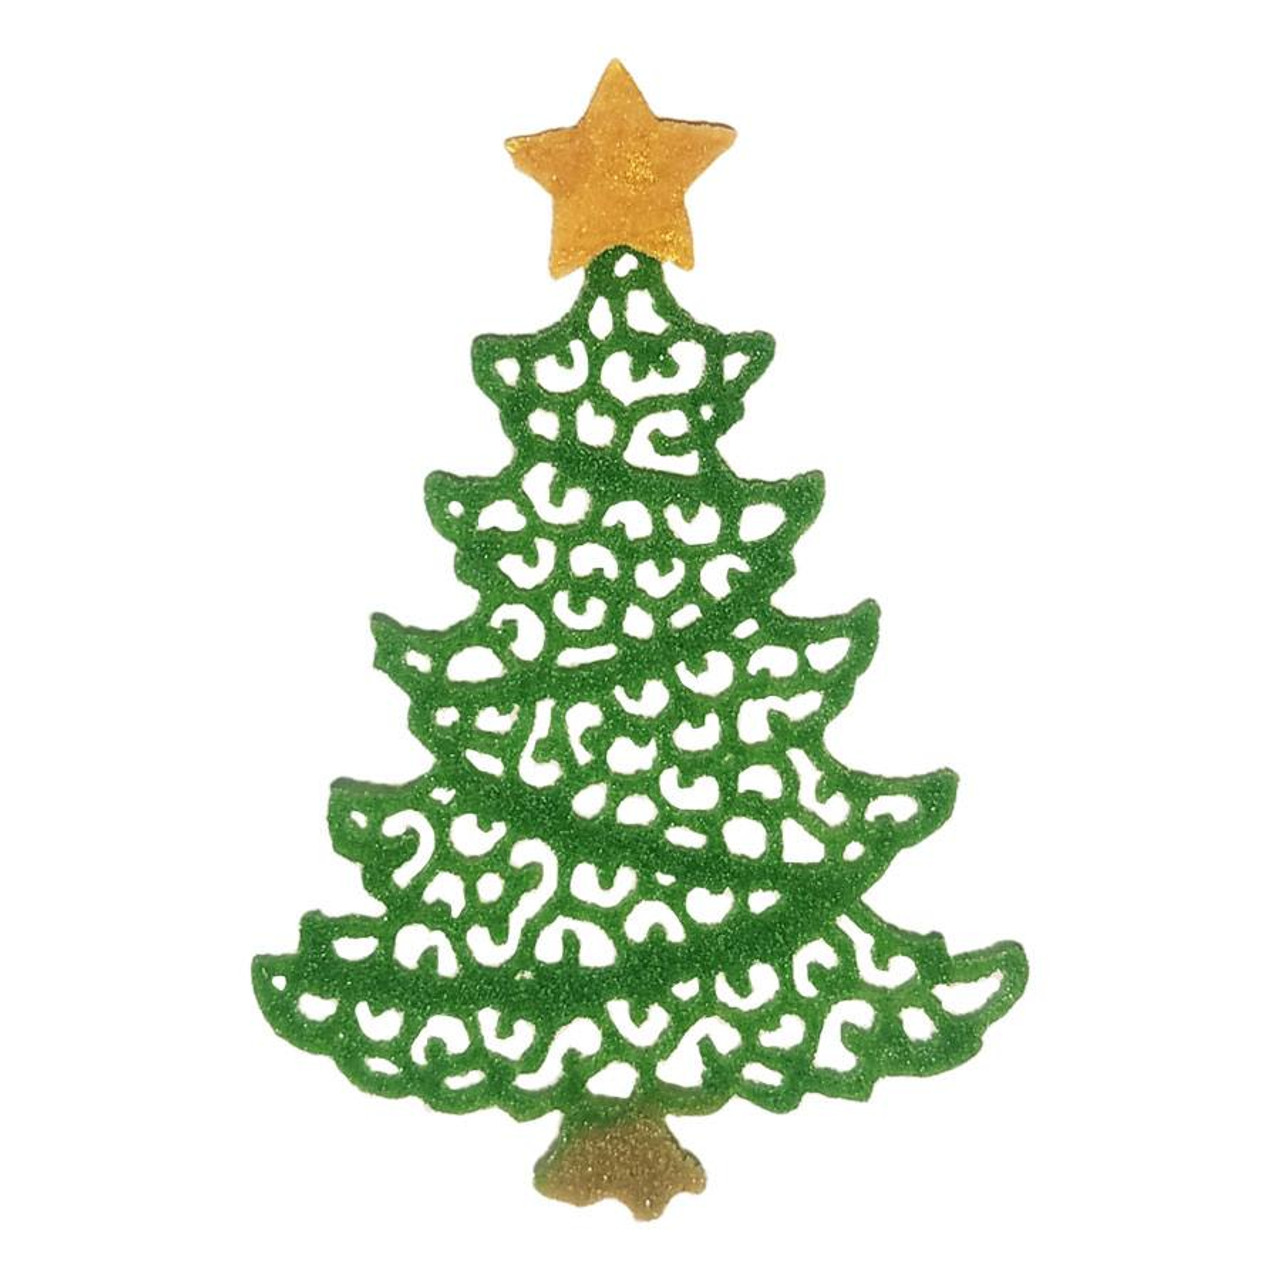 COE96 Fusible Waterjet Cut Glass Large Christmas Tree. Size: 3 x 3.